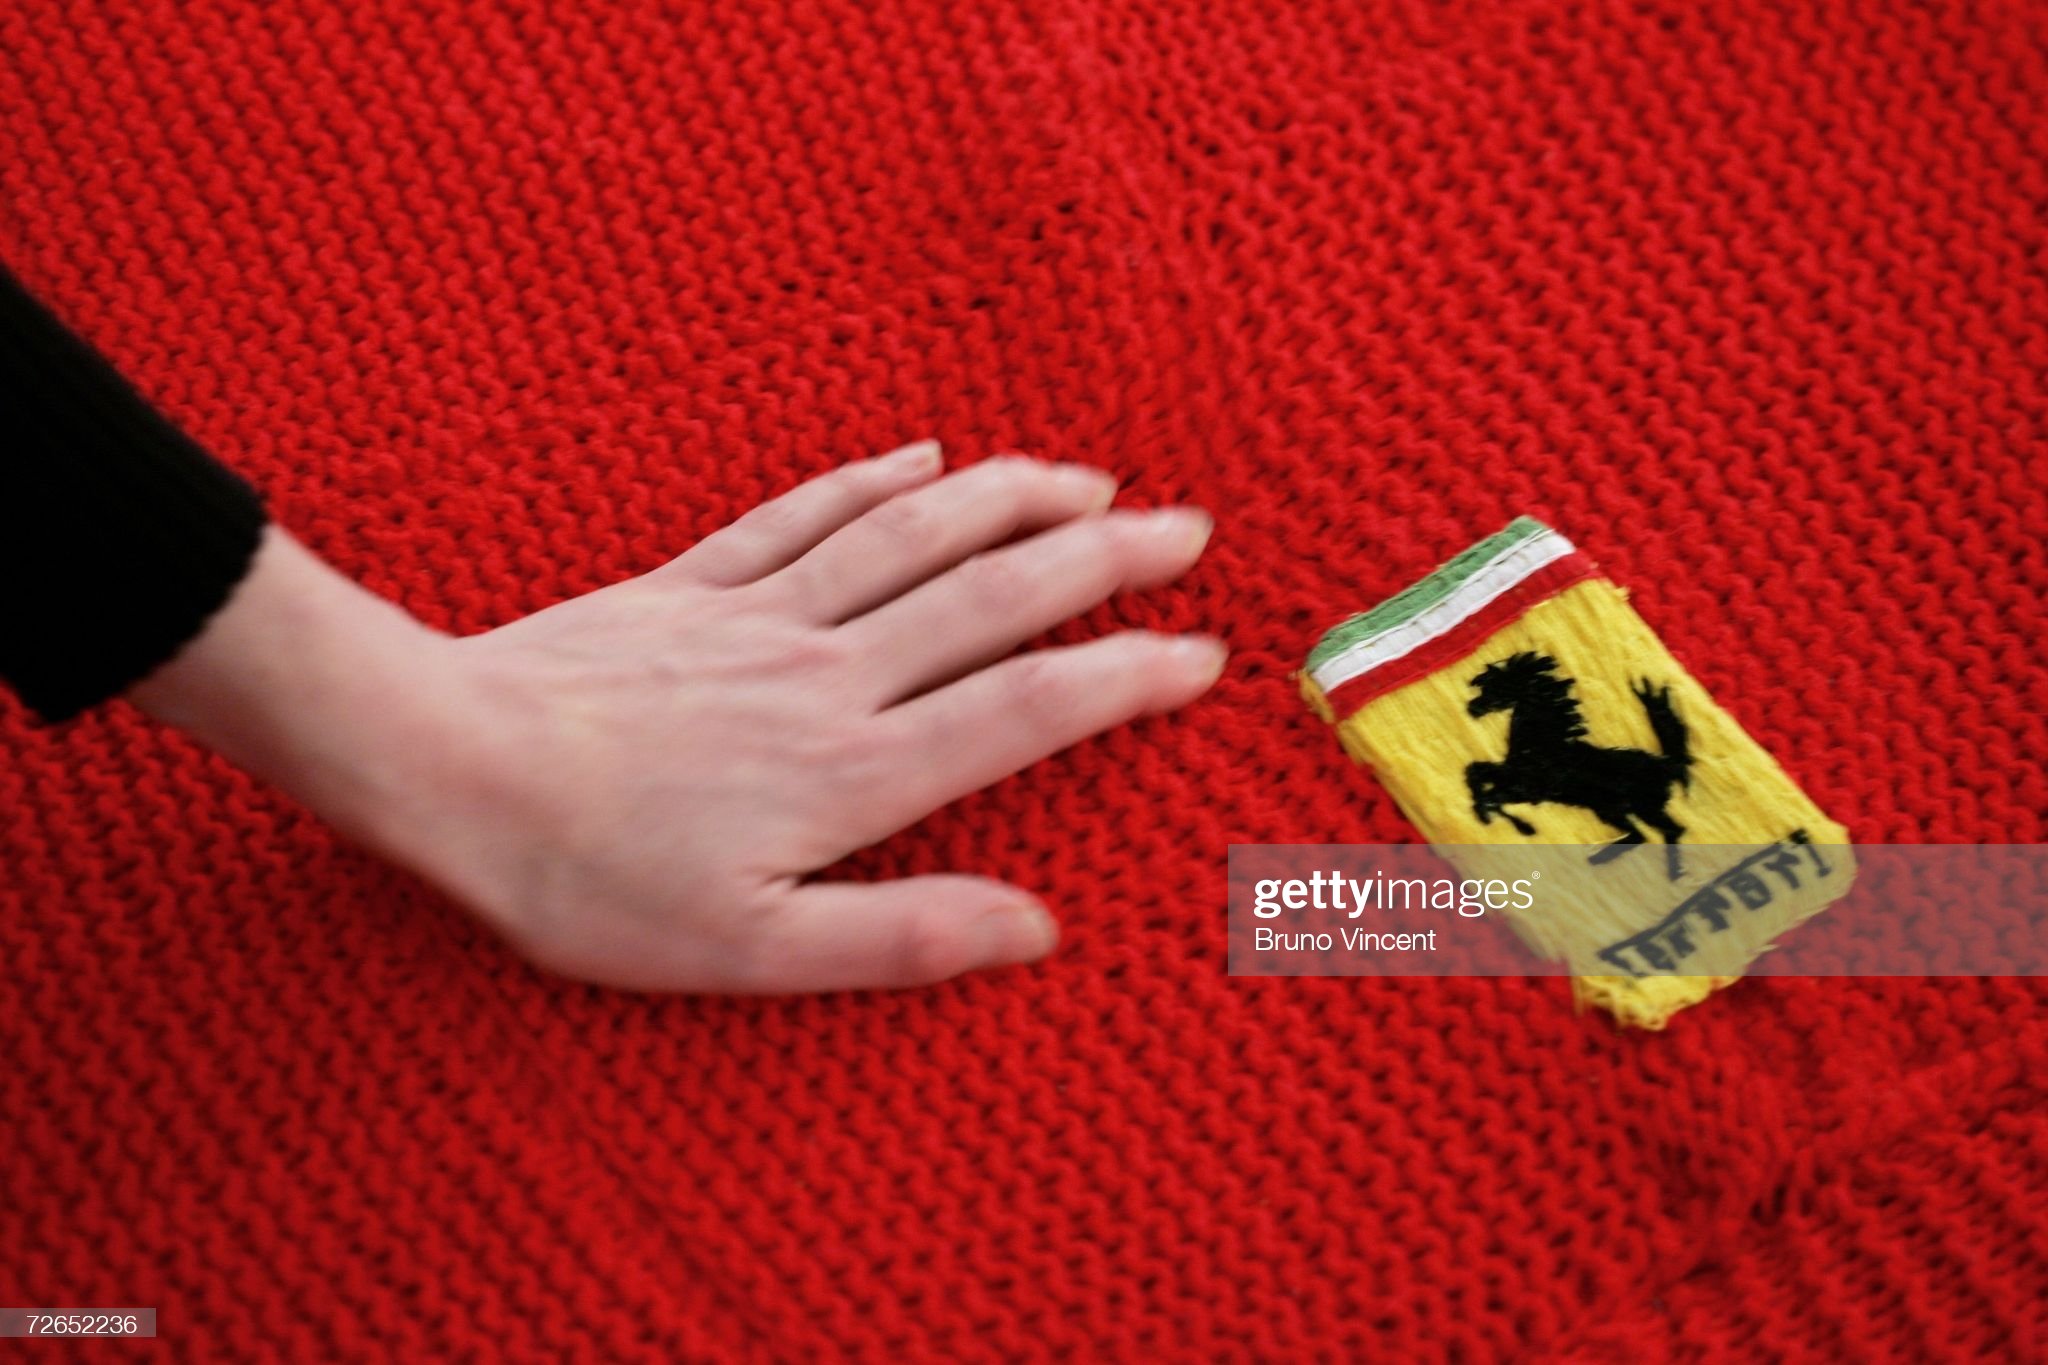 A woman strokes the threads of an entirely knitted full size replica Ferrari sports car on show in a gallery on November 27, 2006 in London, England.